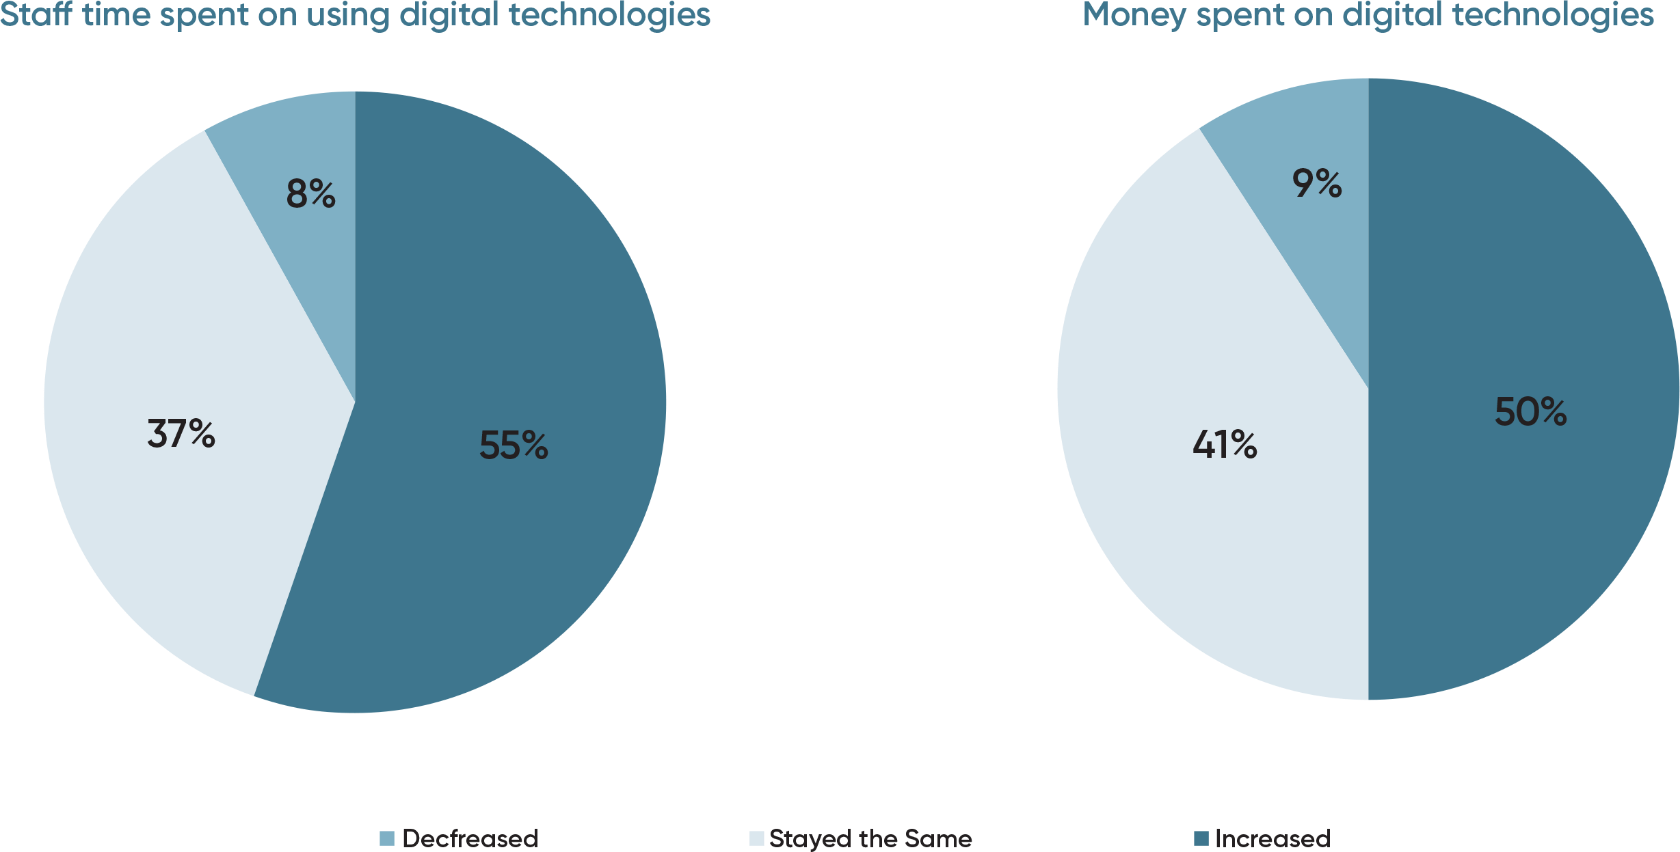 In 2021, how did your overall business spending on digital technology change when compared to 2020?